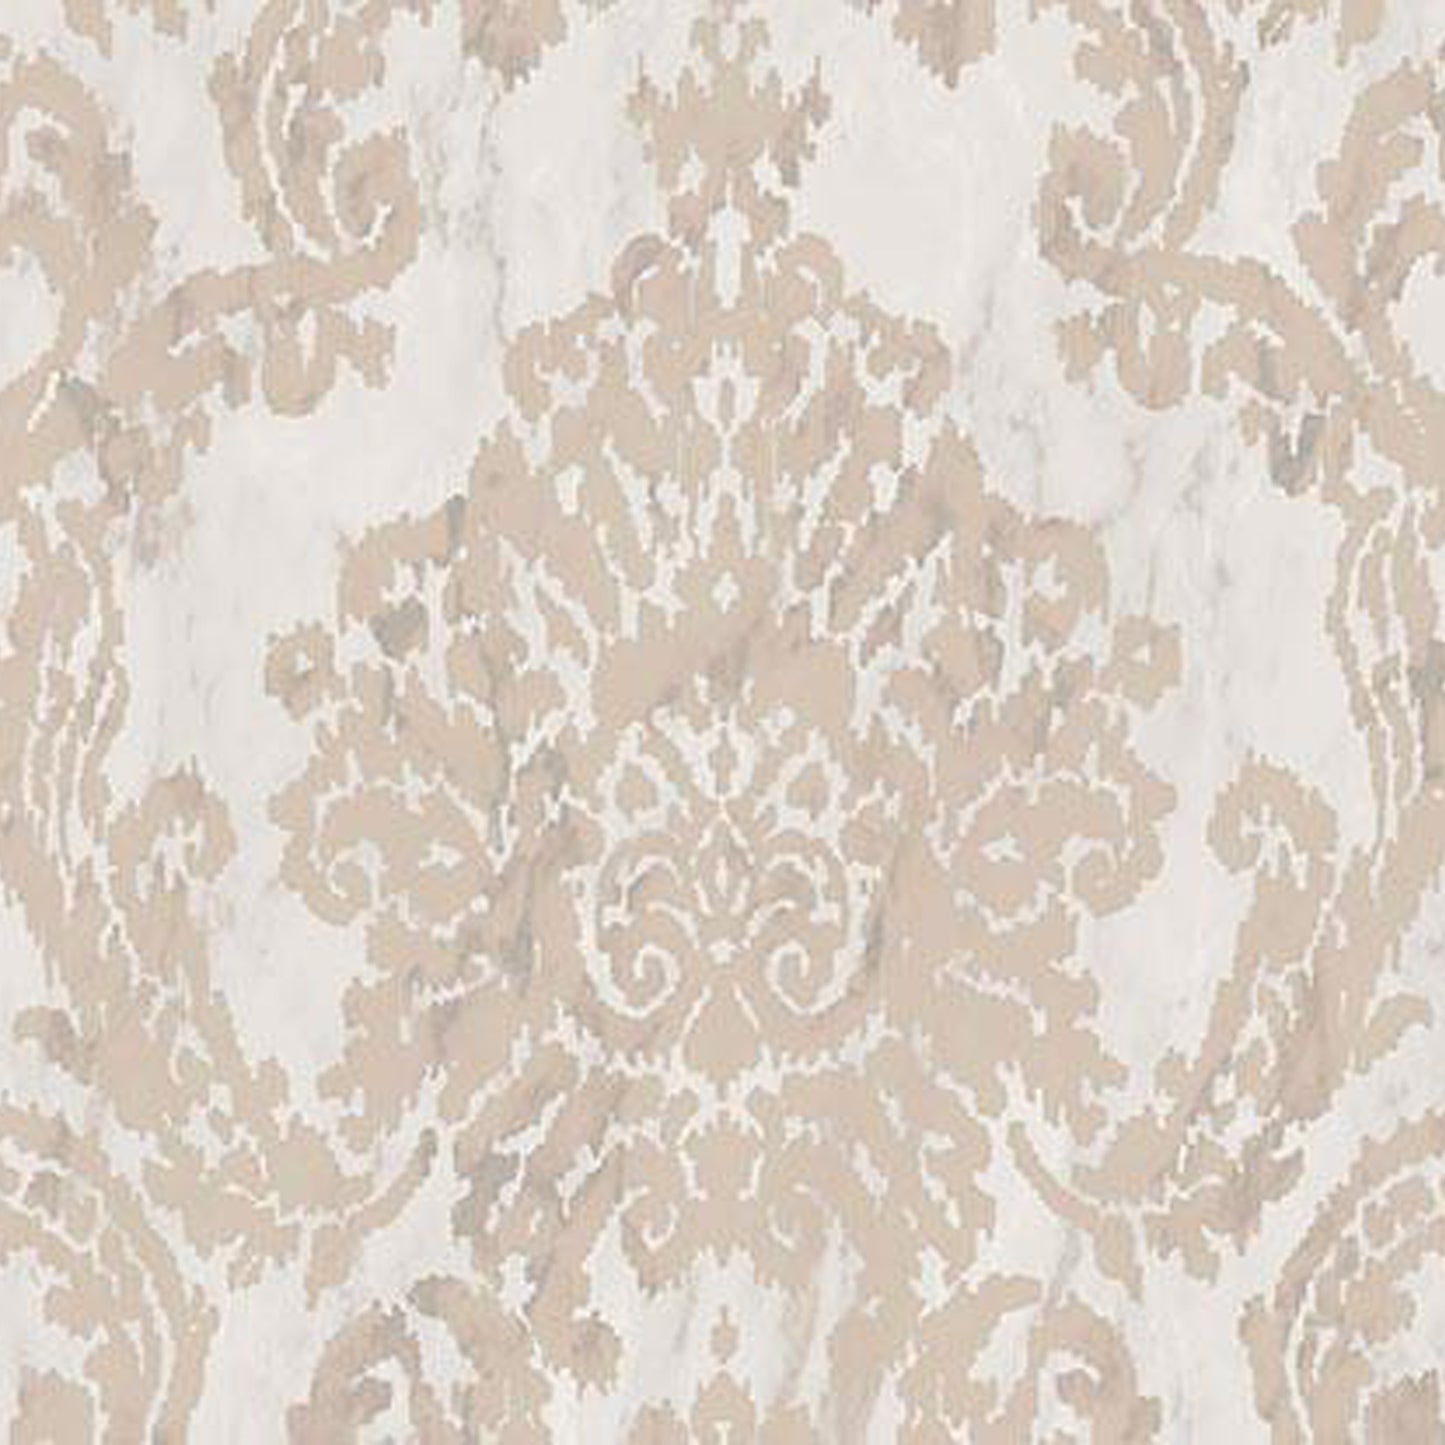 The Royal Touch  Damask Wallpaper